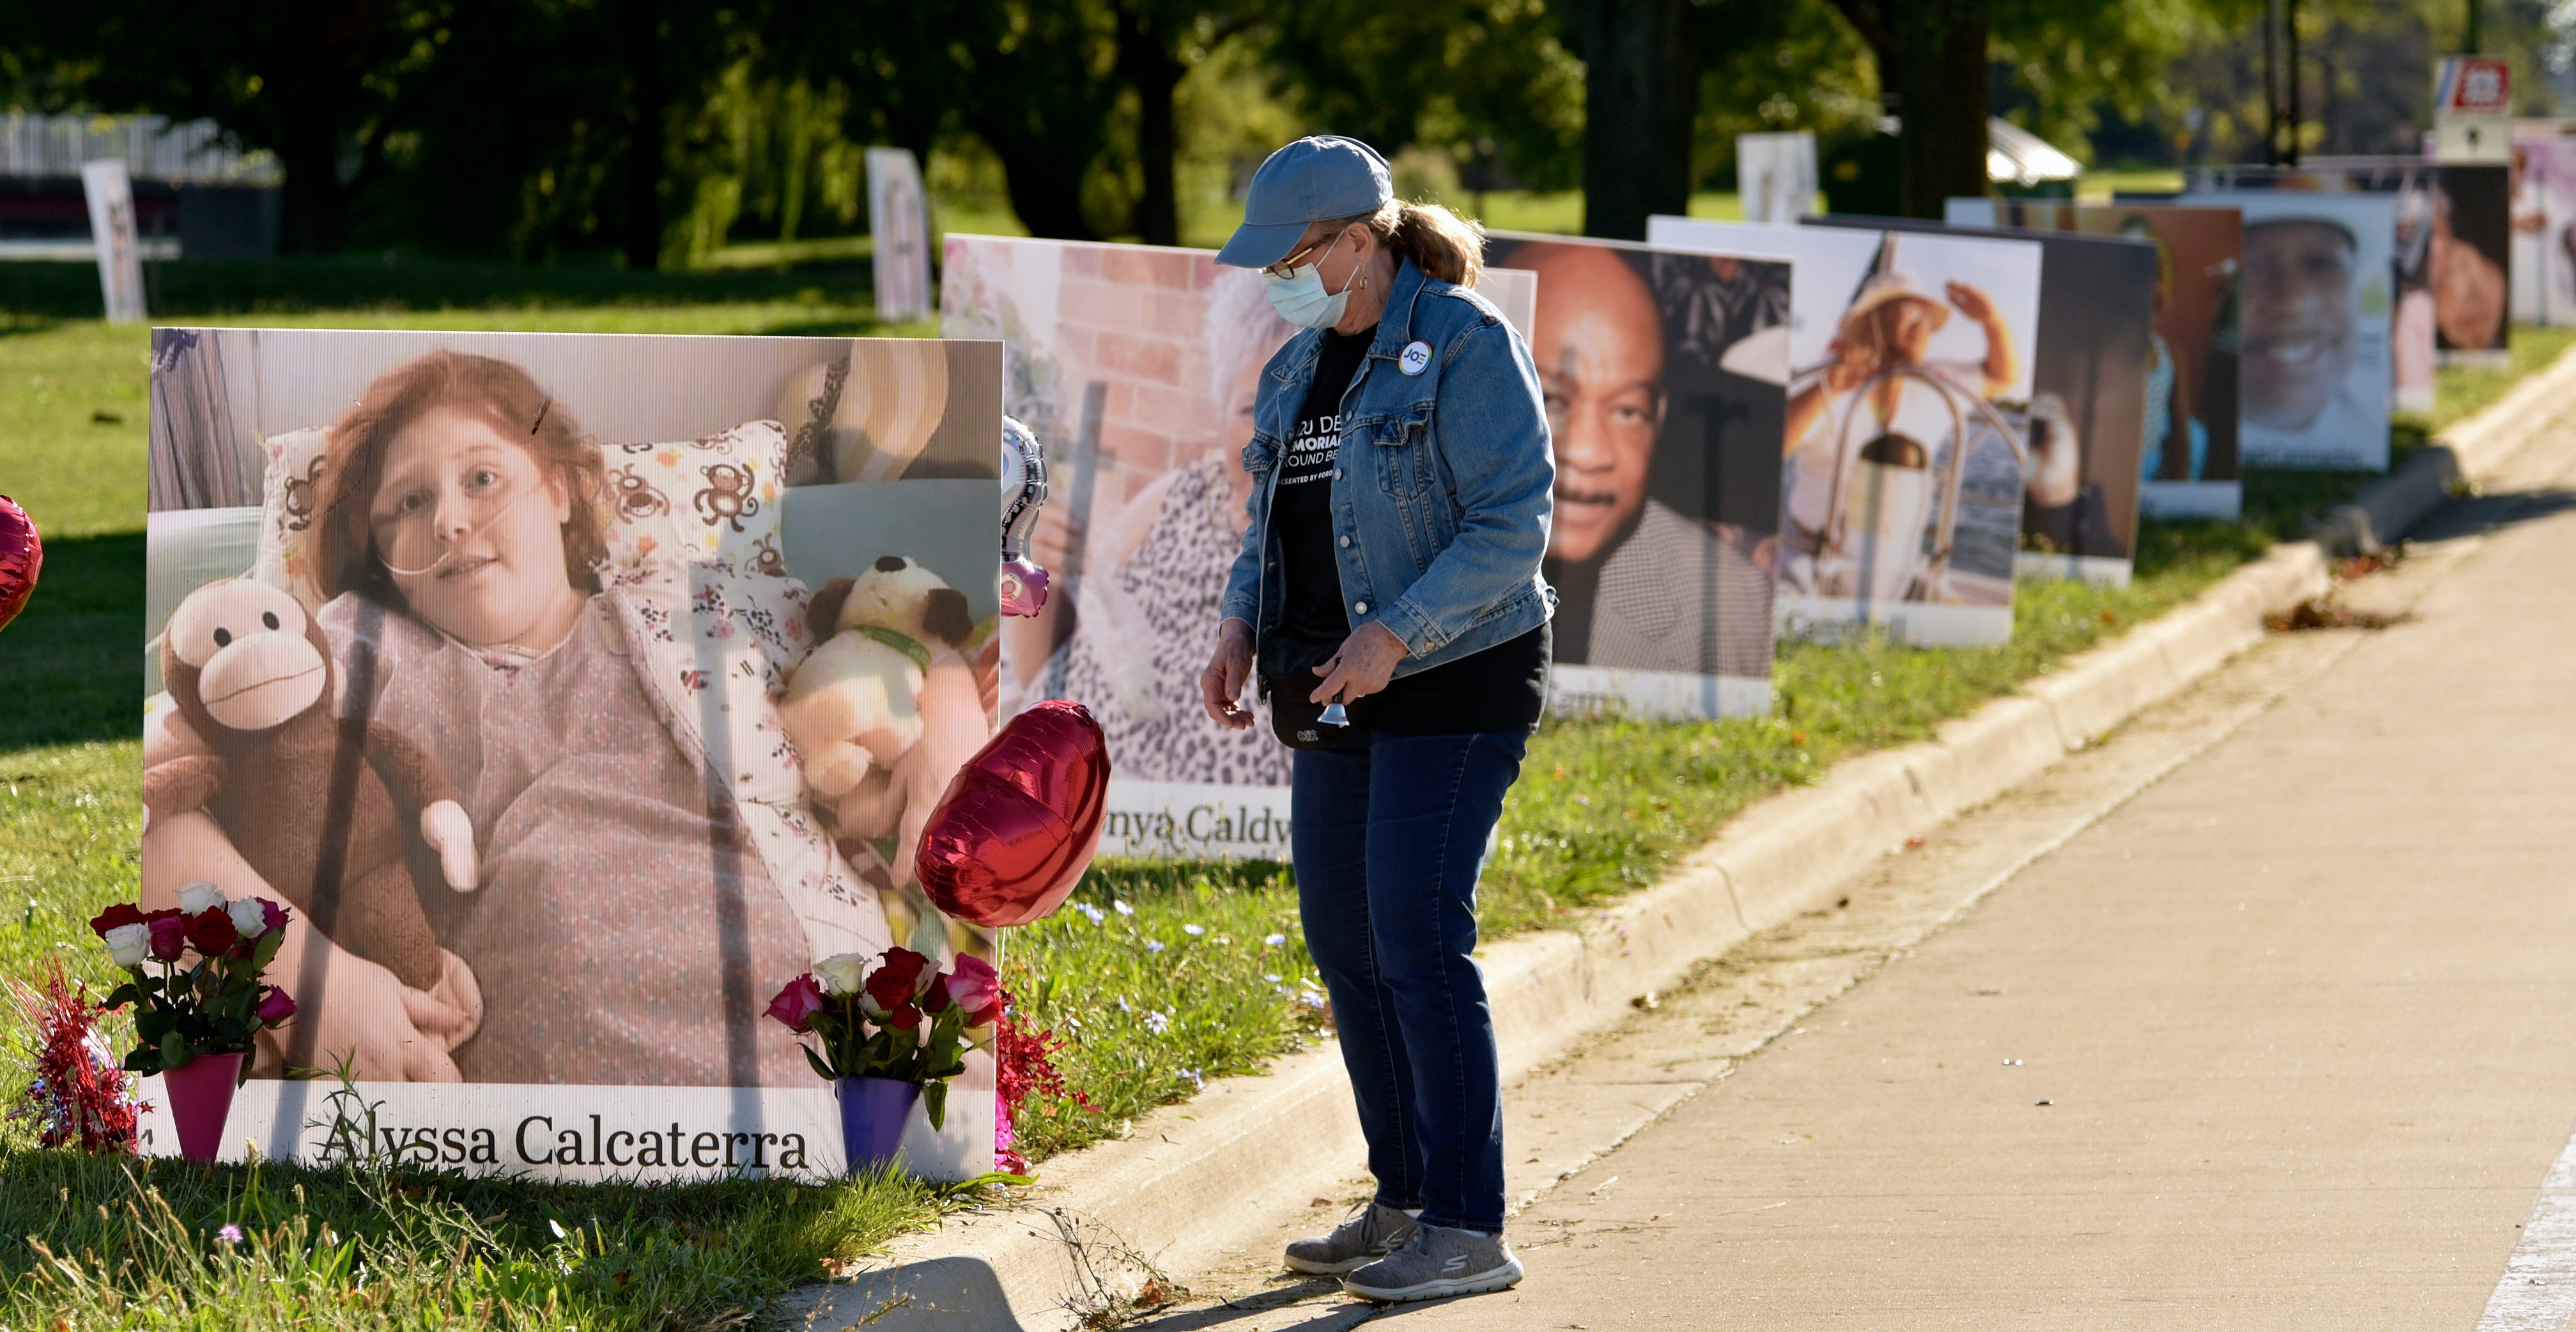 Volunteer Margaret Gore of St. Clair Shores straightens balloons attached to the portrait of COVID-19 victim Alyssa Calcaterra of Madison Heights along The Strand.